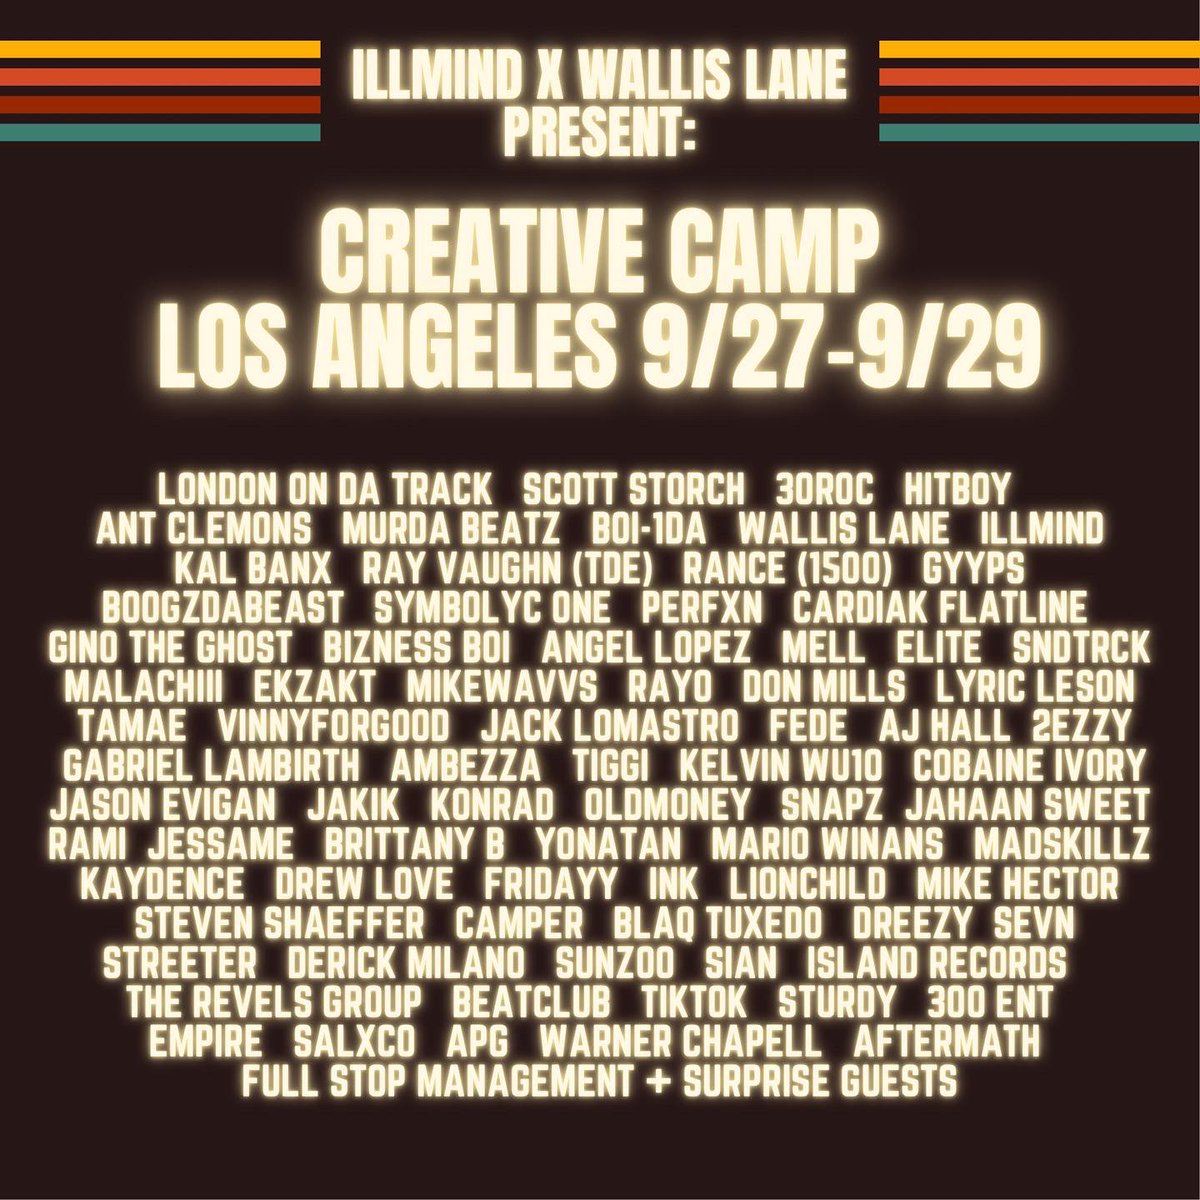 This camp next week is going to be massive. What an honor to be doing this with such an incredible group of creators. The types of songs that will be created are just mind boggling 🤯 Producers, loop makers, songwriters, engineers, executives and sponsors 🙏🏽 Let’s make history ❤️